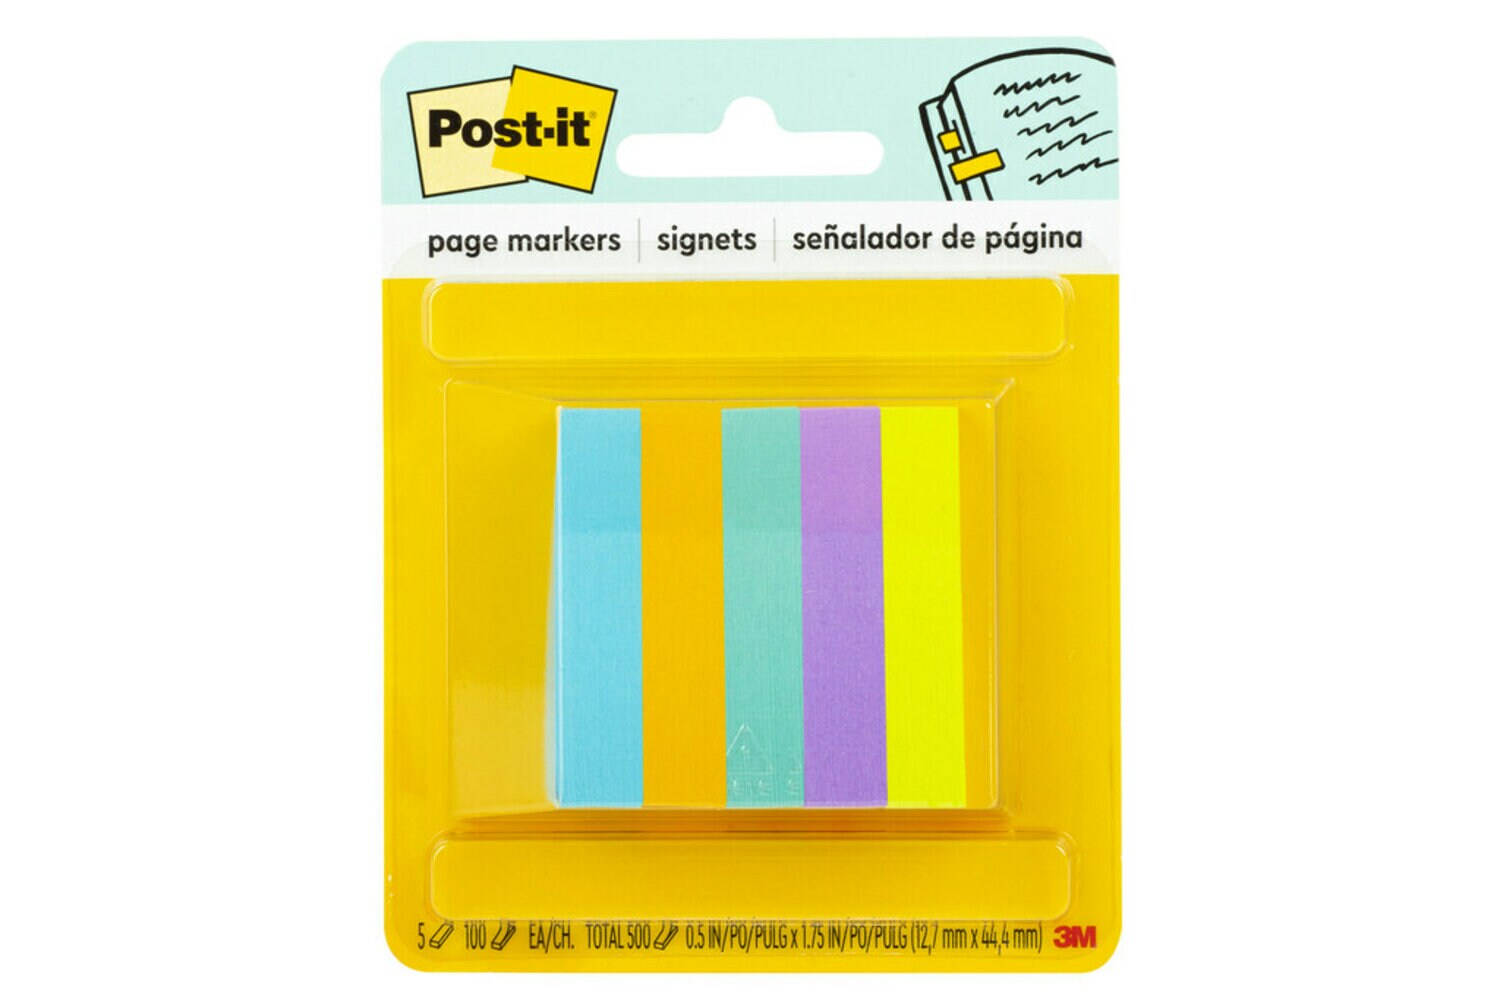 7100036471 - Post-it Page Marker 671-4AU, 7/8 in x 2 7/8 in x (22,2 mm x 73 mm)
Assorted Colors